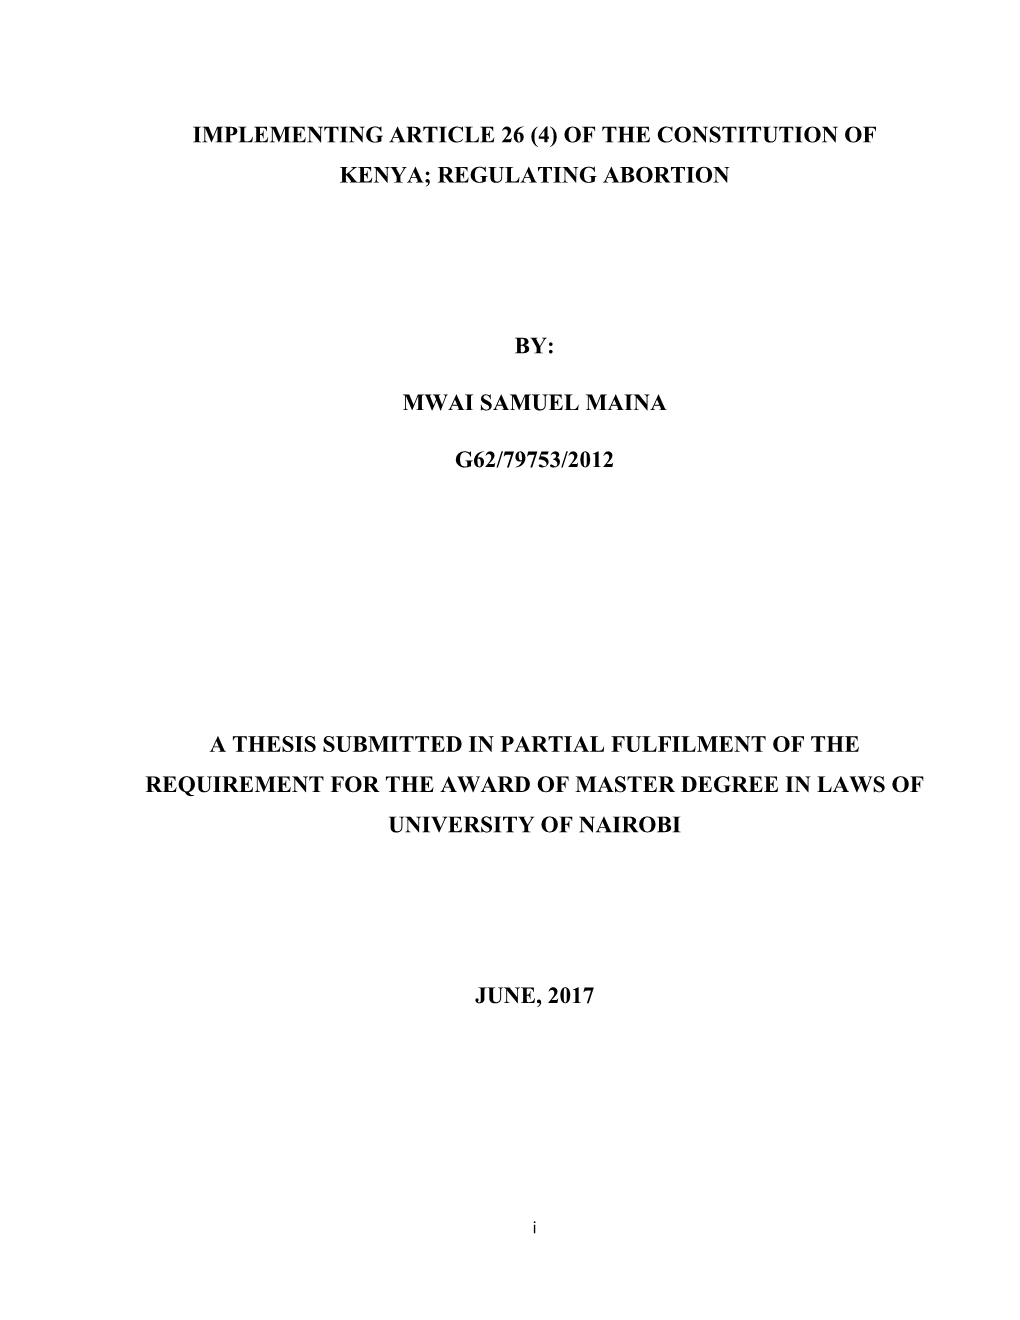 (4) of the Constitution of Kenya; Regulating Abortion